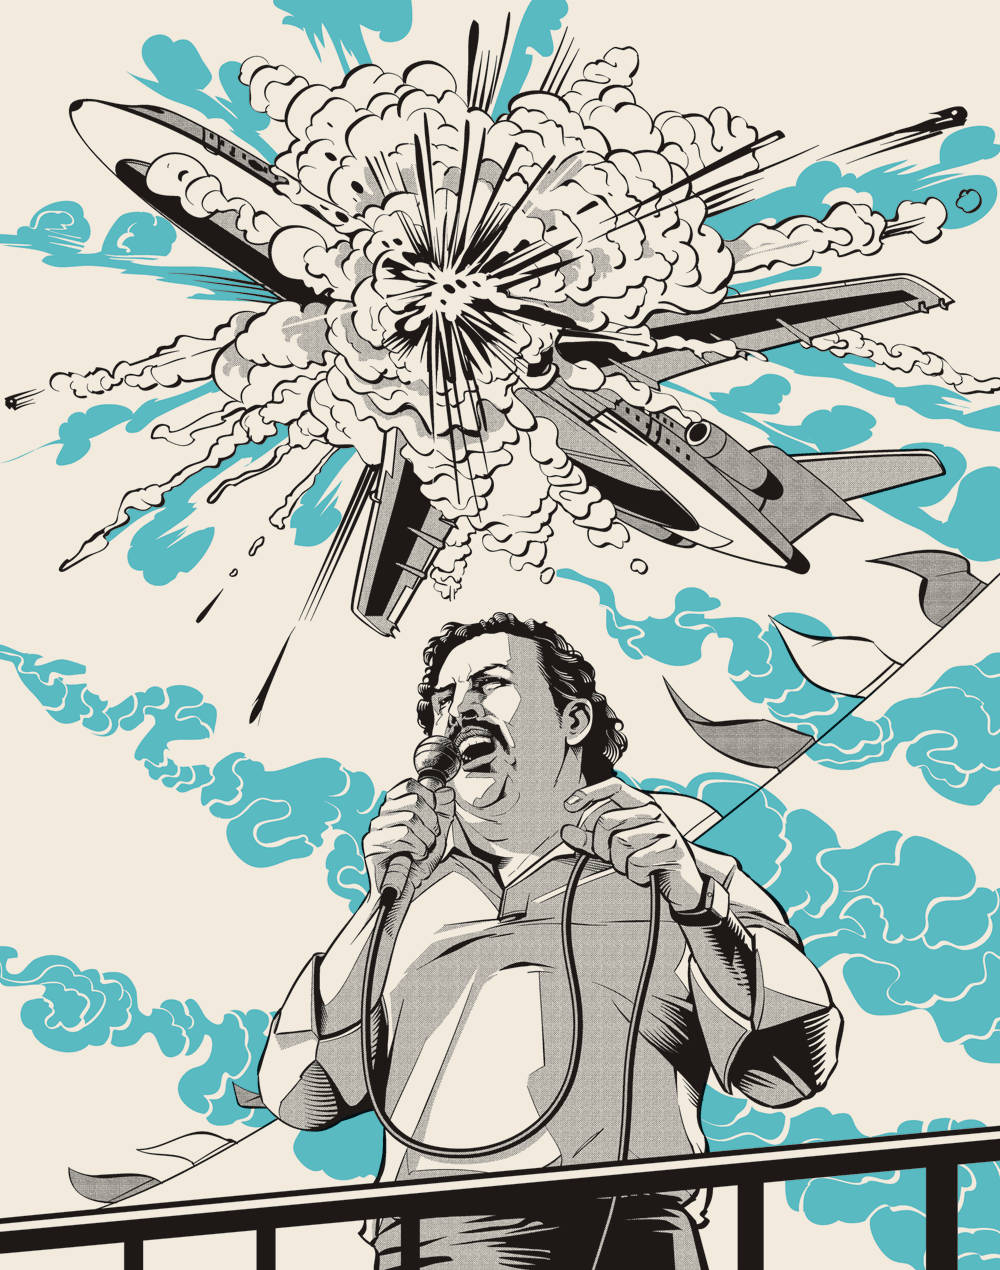 Pablo Escobar with his airplane in the backdrop. Wallpaper